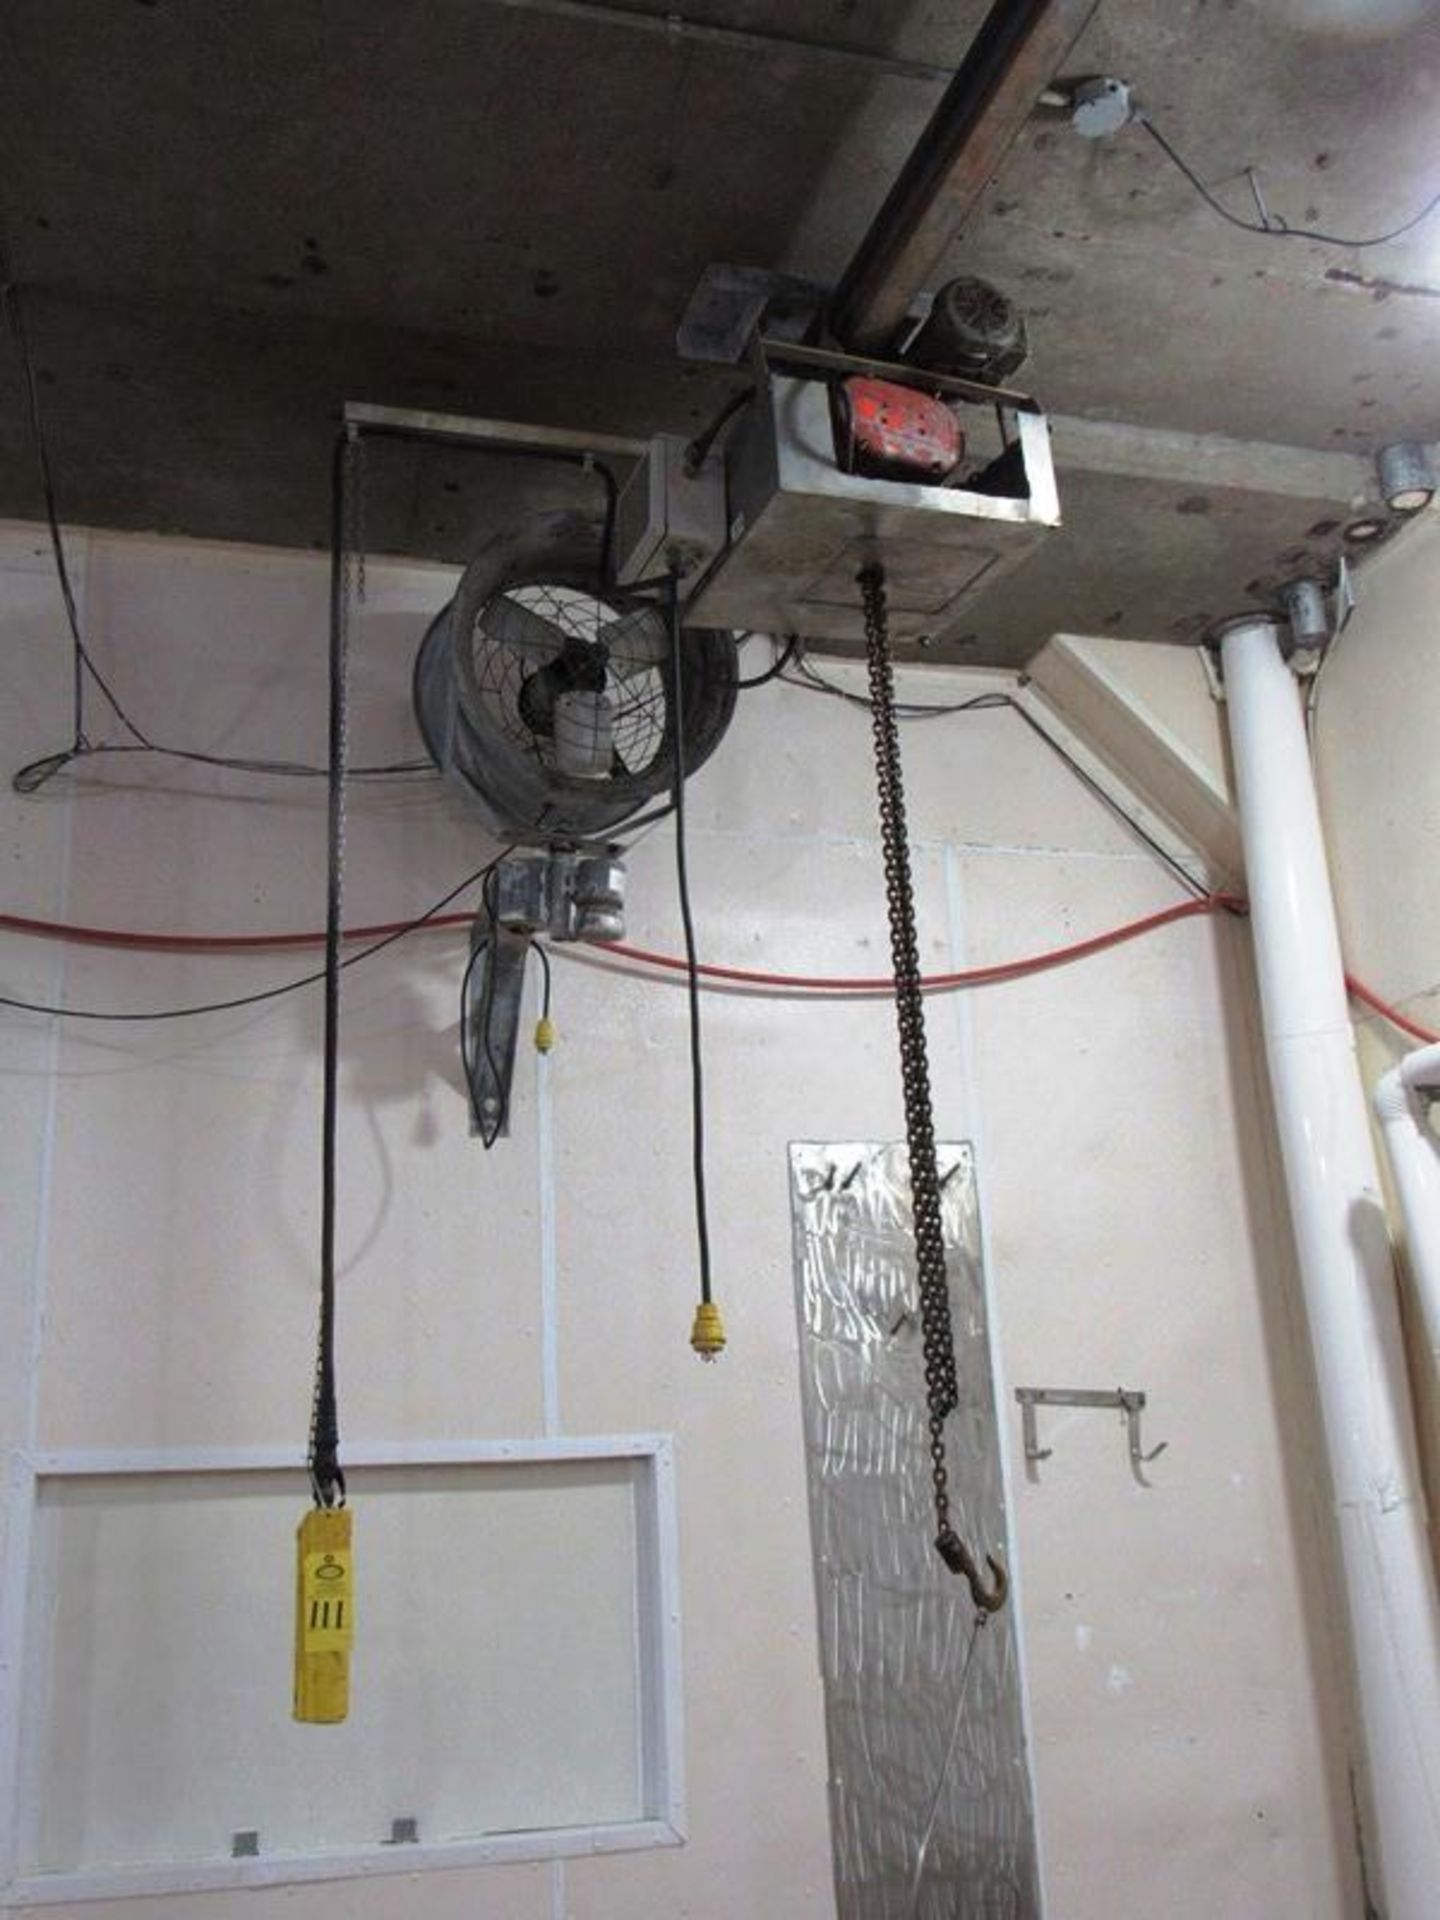 Chain Hoist, 1 ton capacity, chain, hook, controls Removal: By Appointment Only. Required Rigging